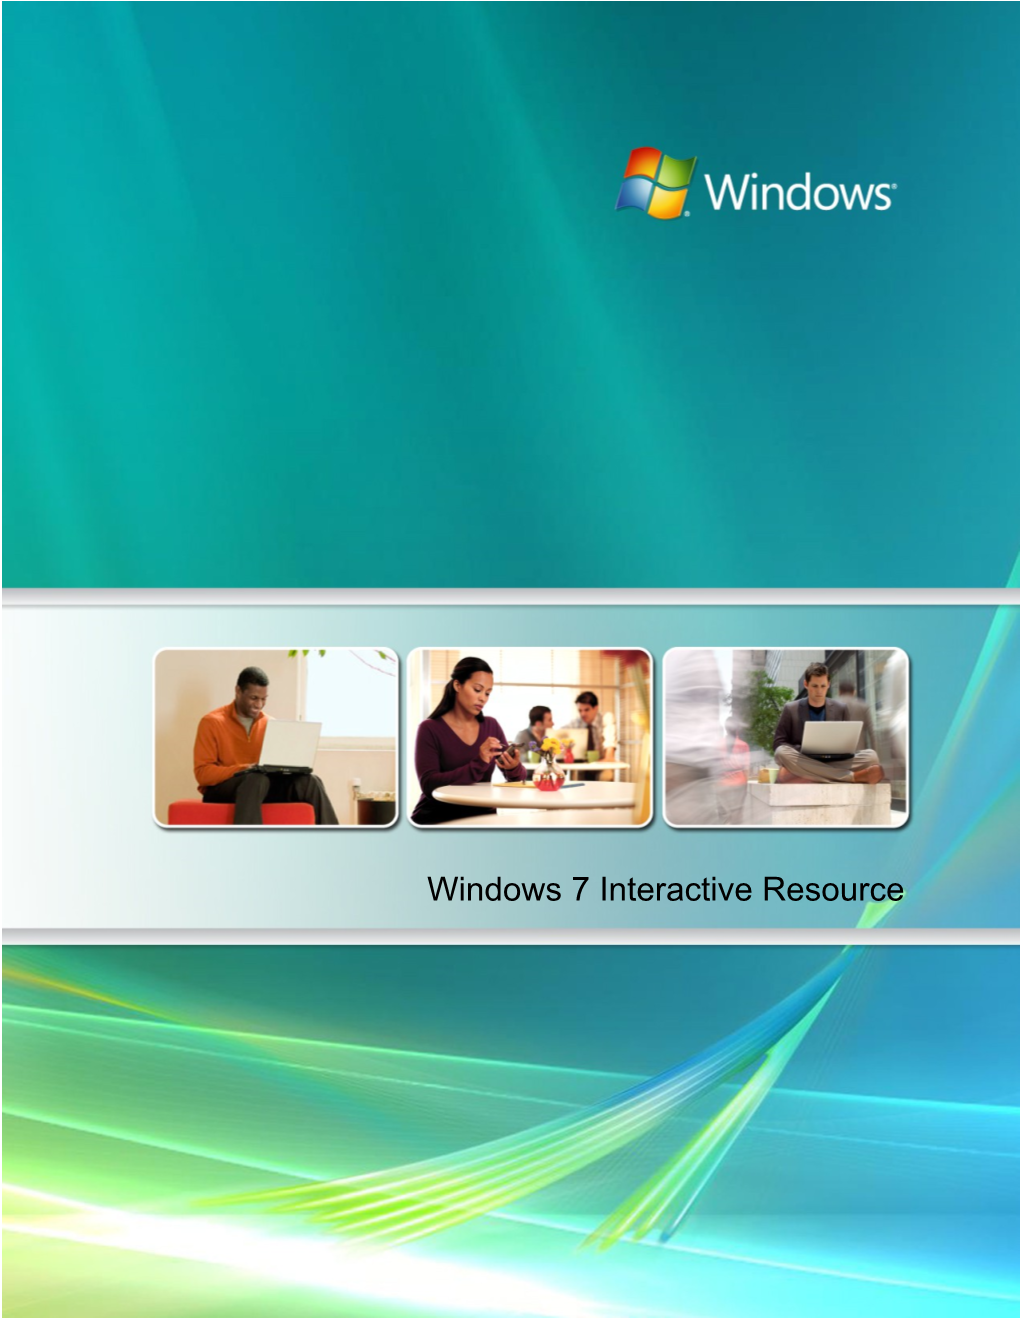 What Windows 7 Means to Users